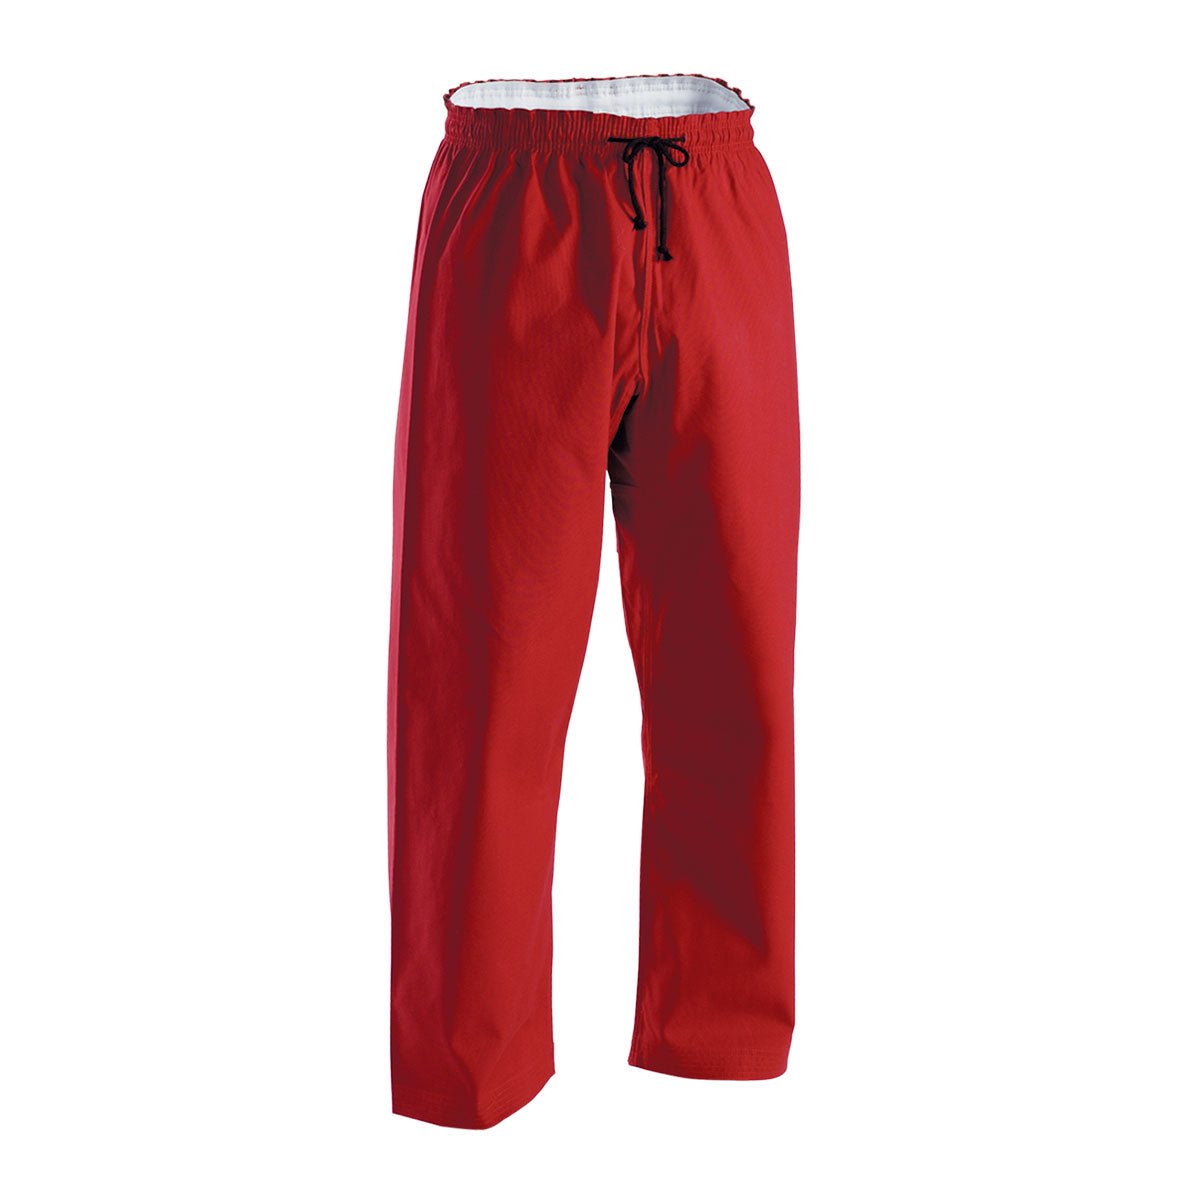 10 oz. Middleweight Brushed Cotton Elastic Waist Pants Red